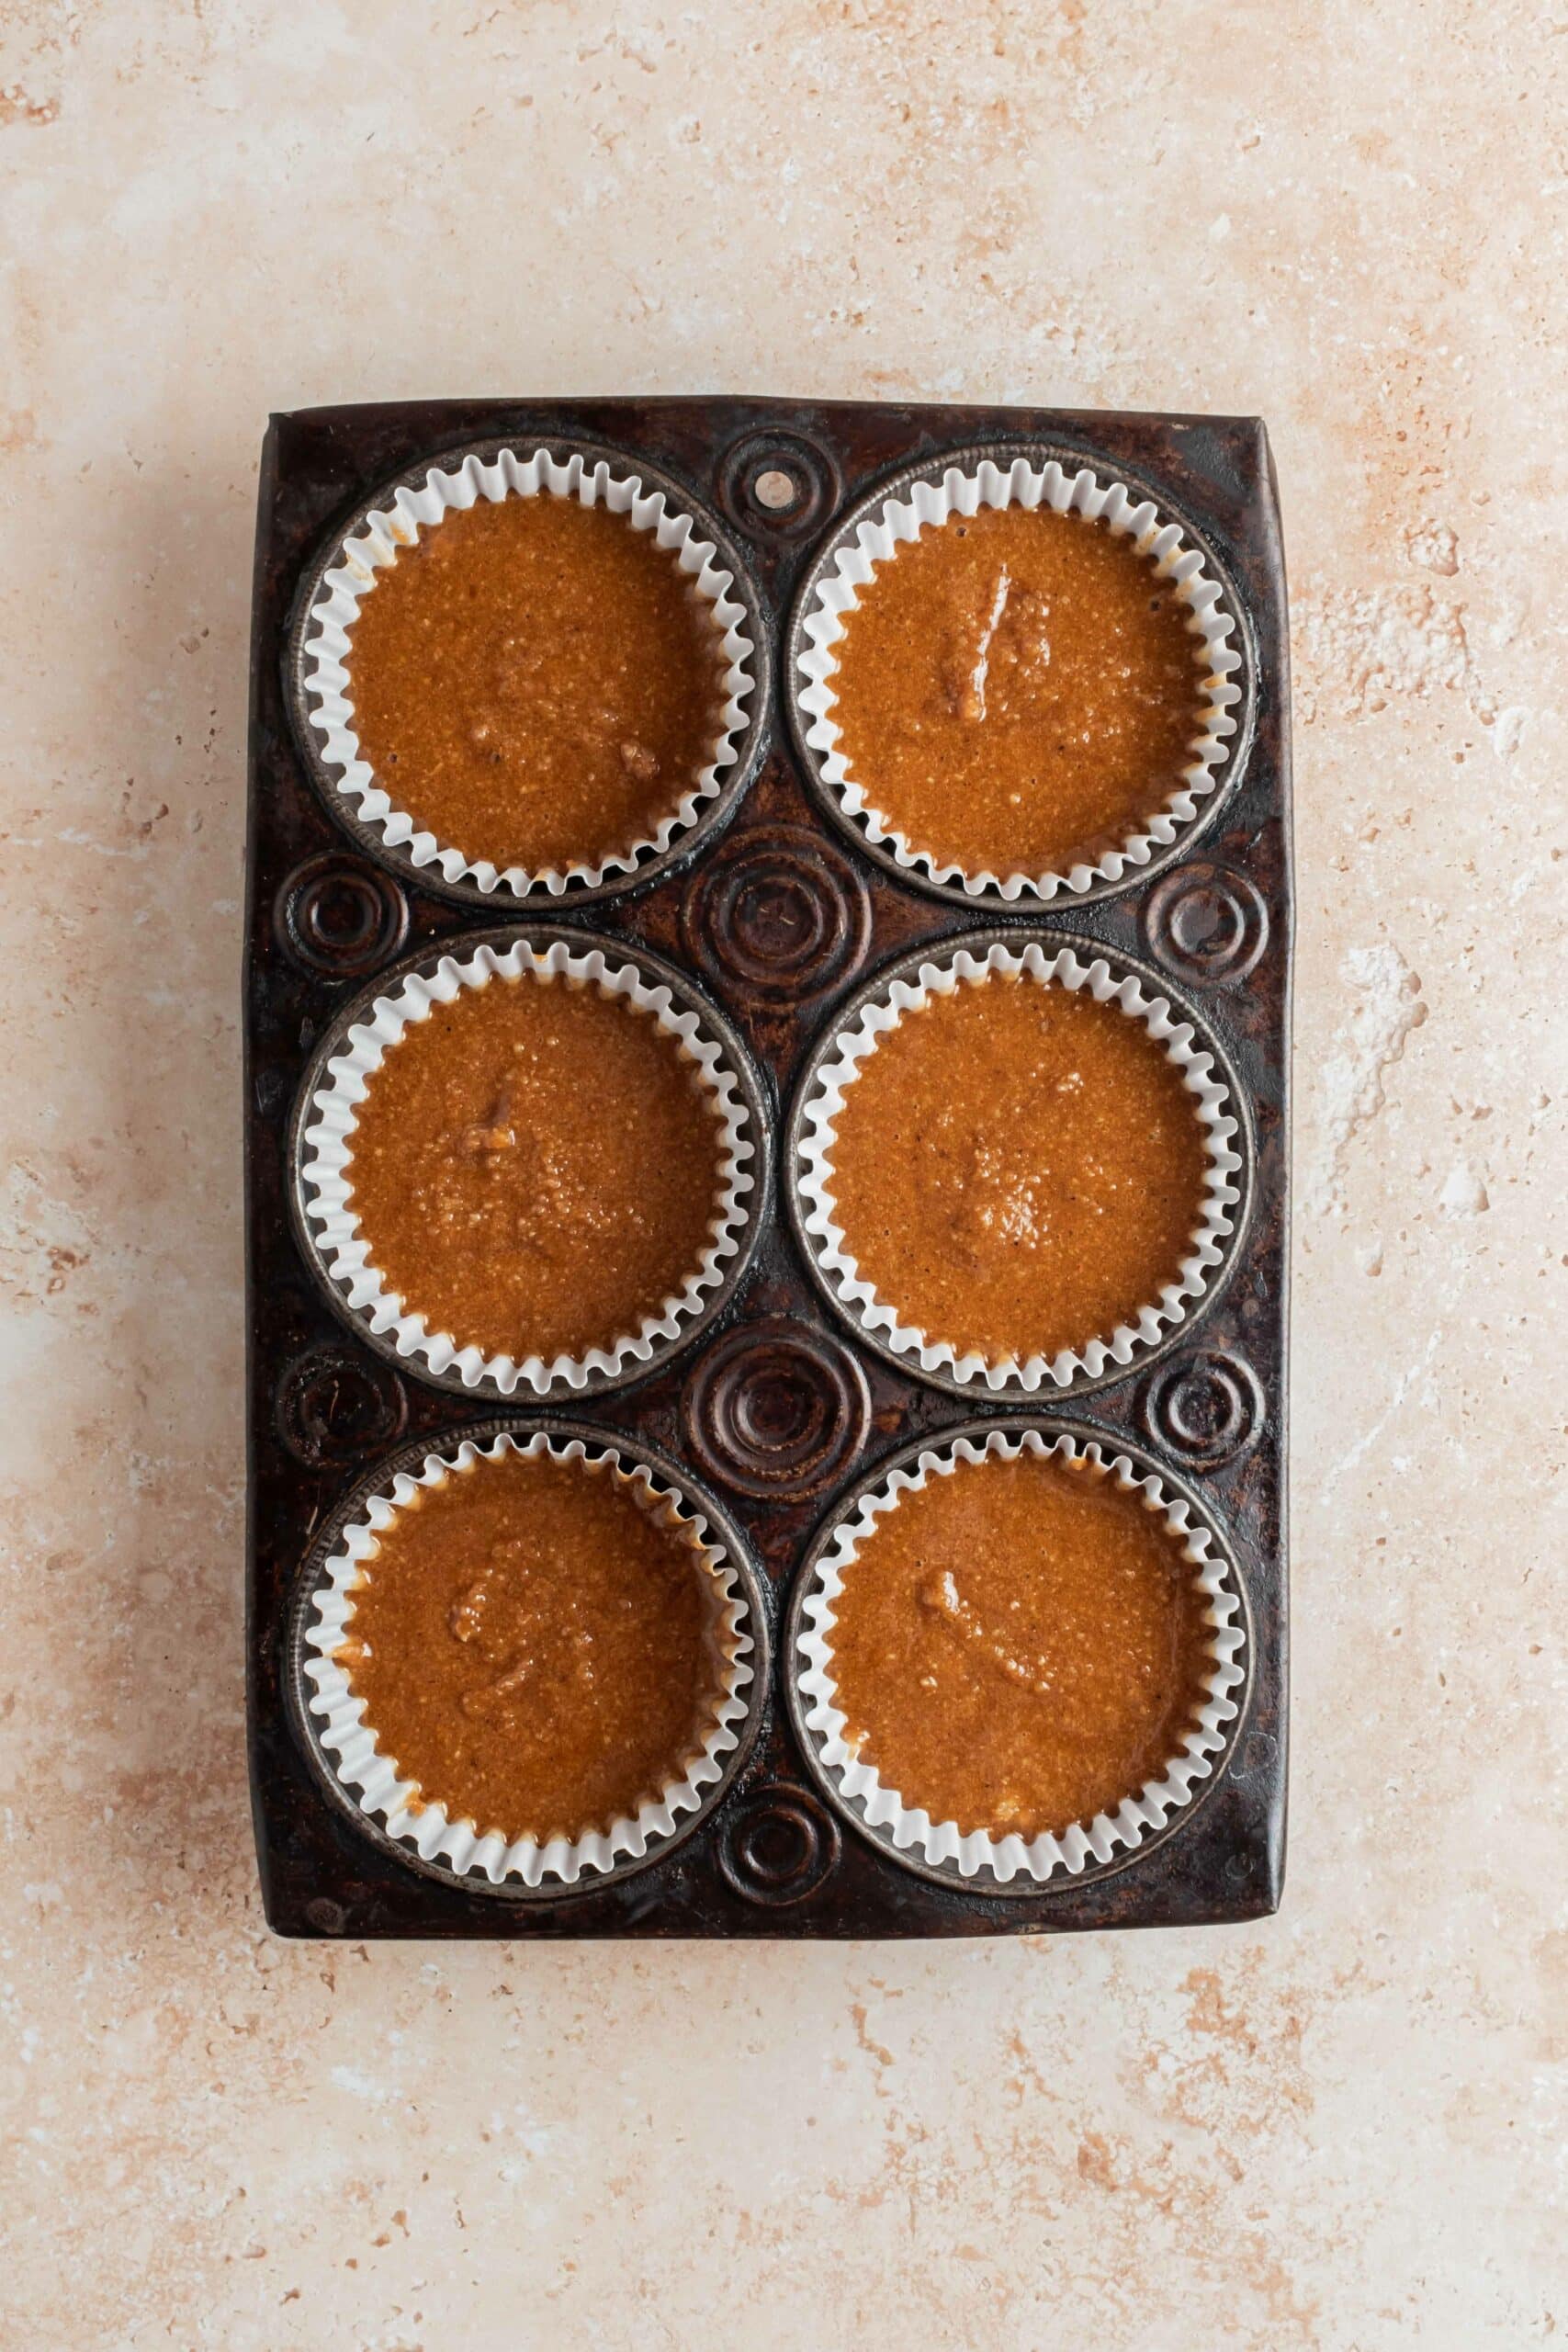 unbaked muffins in tin